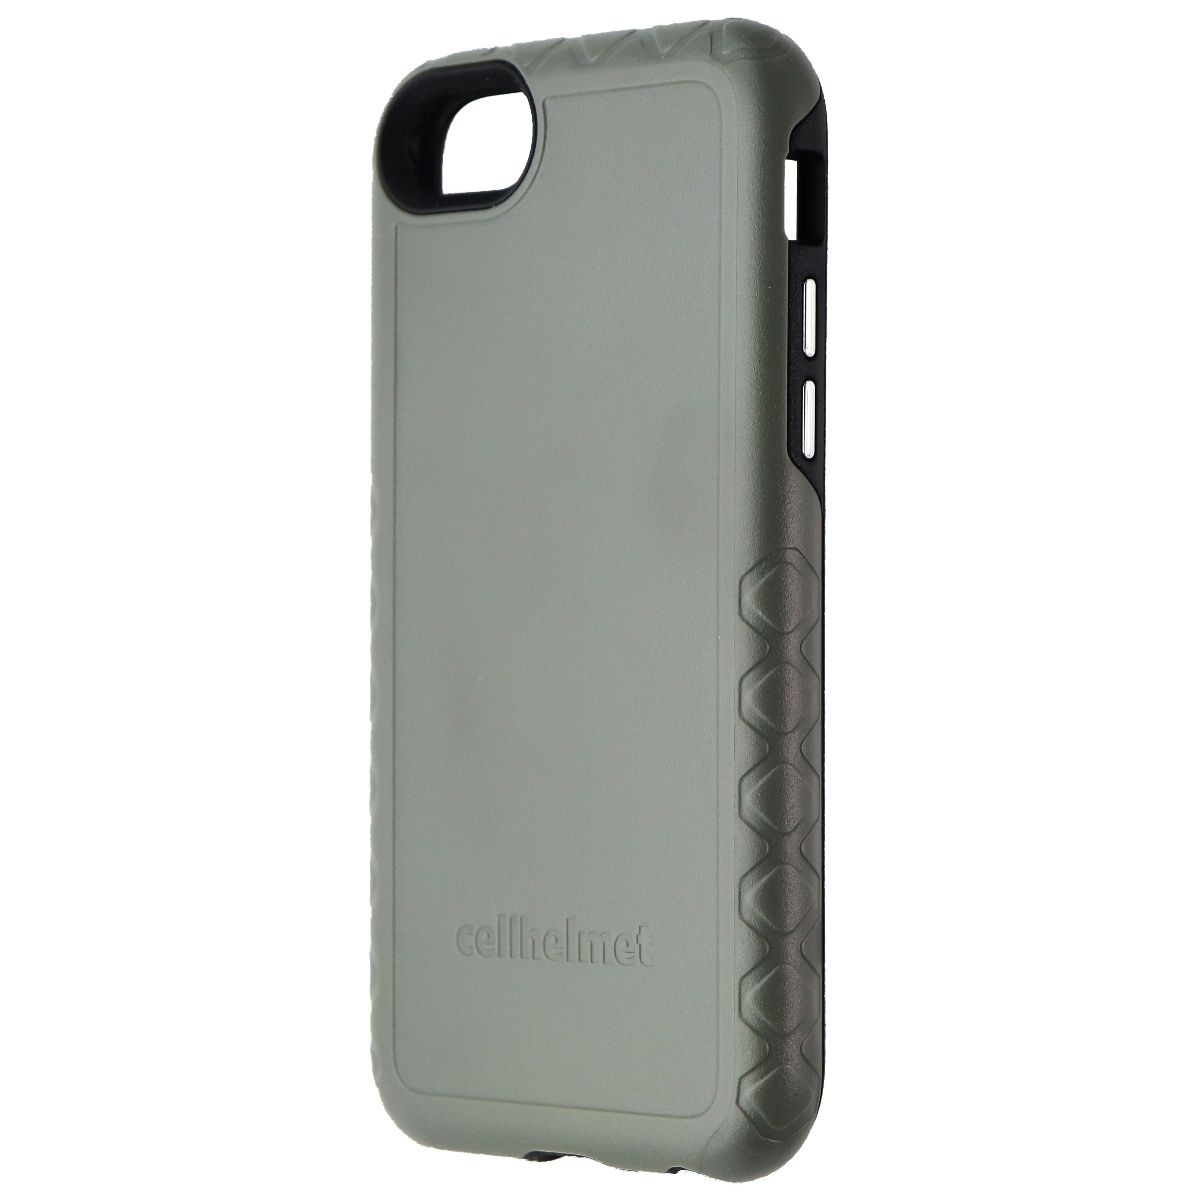 Cellhelmet - ODG/Olive Drab Green/Tactical Green Dual Layer Case IPhone SE/6/7/8